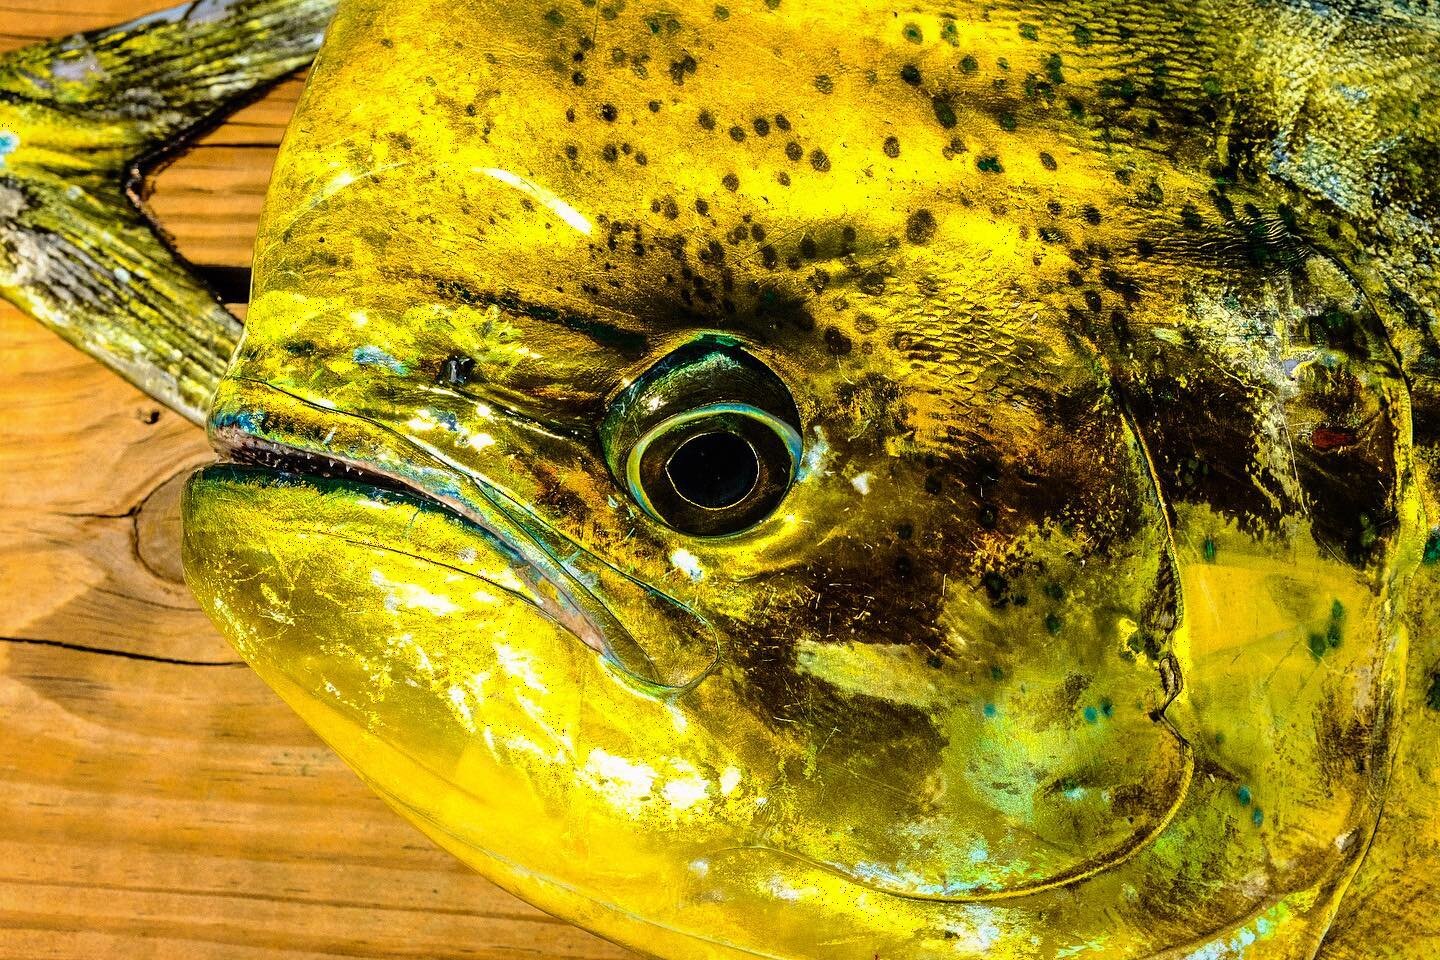 Always amazed by the beauty of these fish #mahi #dolphin #offshore #saltwater #fishing #bluewater #gulfstream #obx #outerbanks #fish #photography #catchoftheday